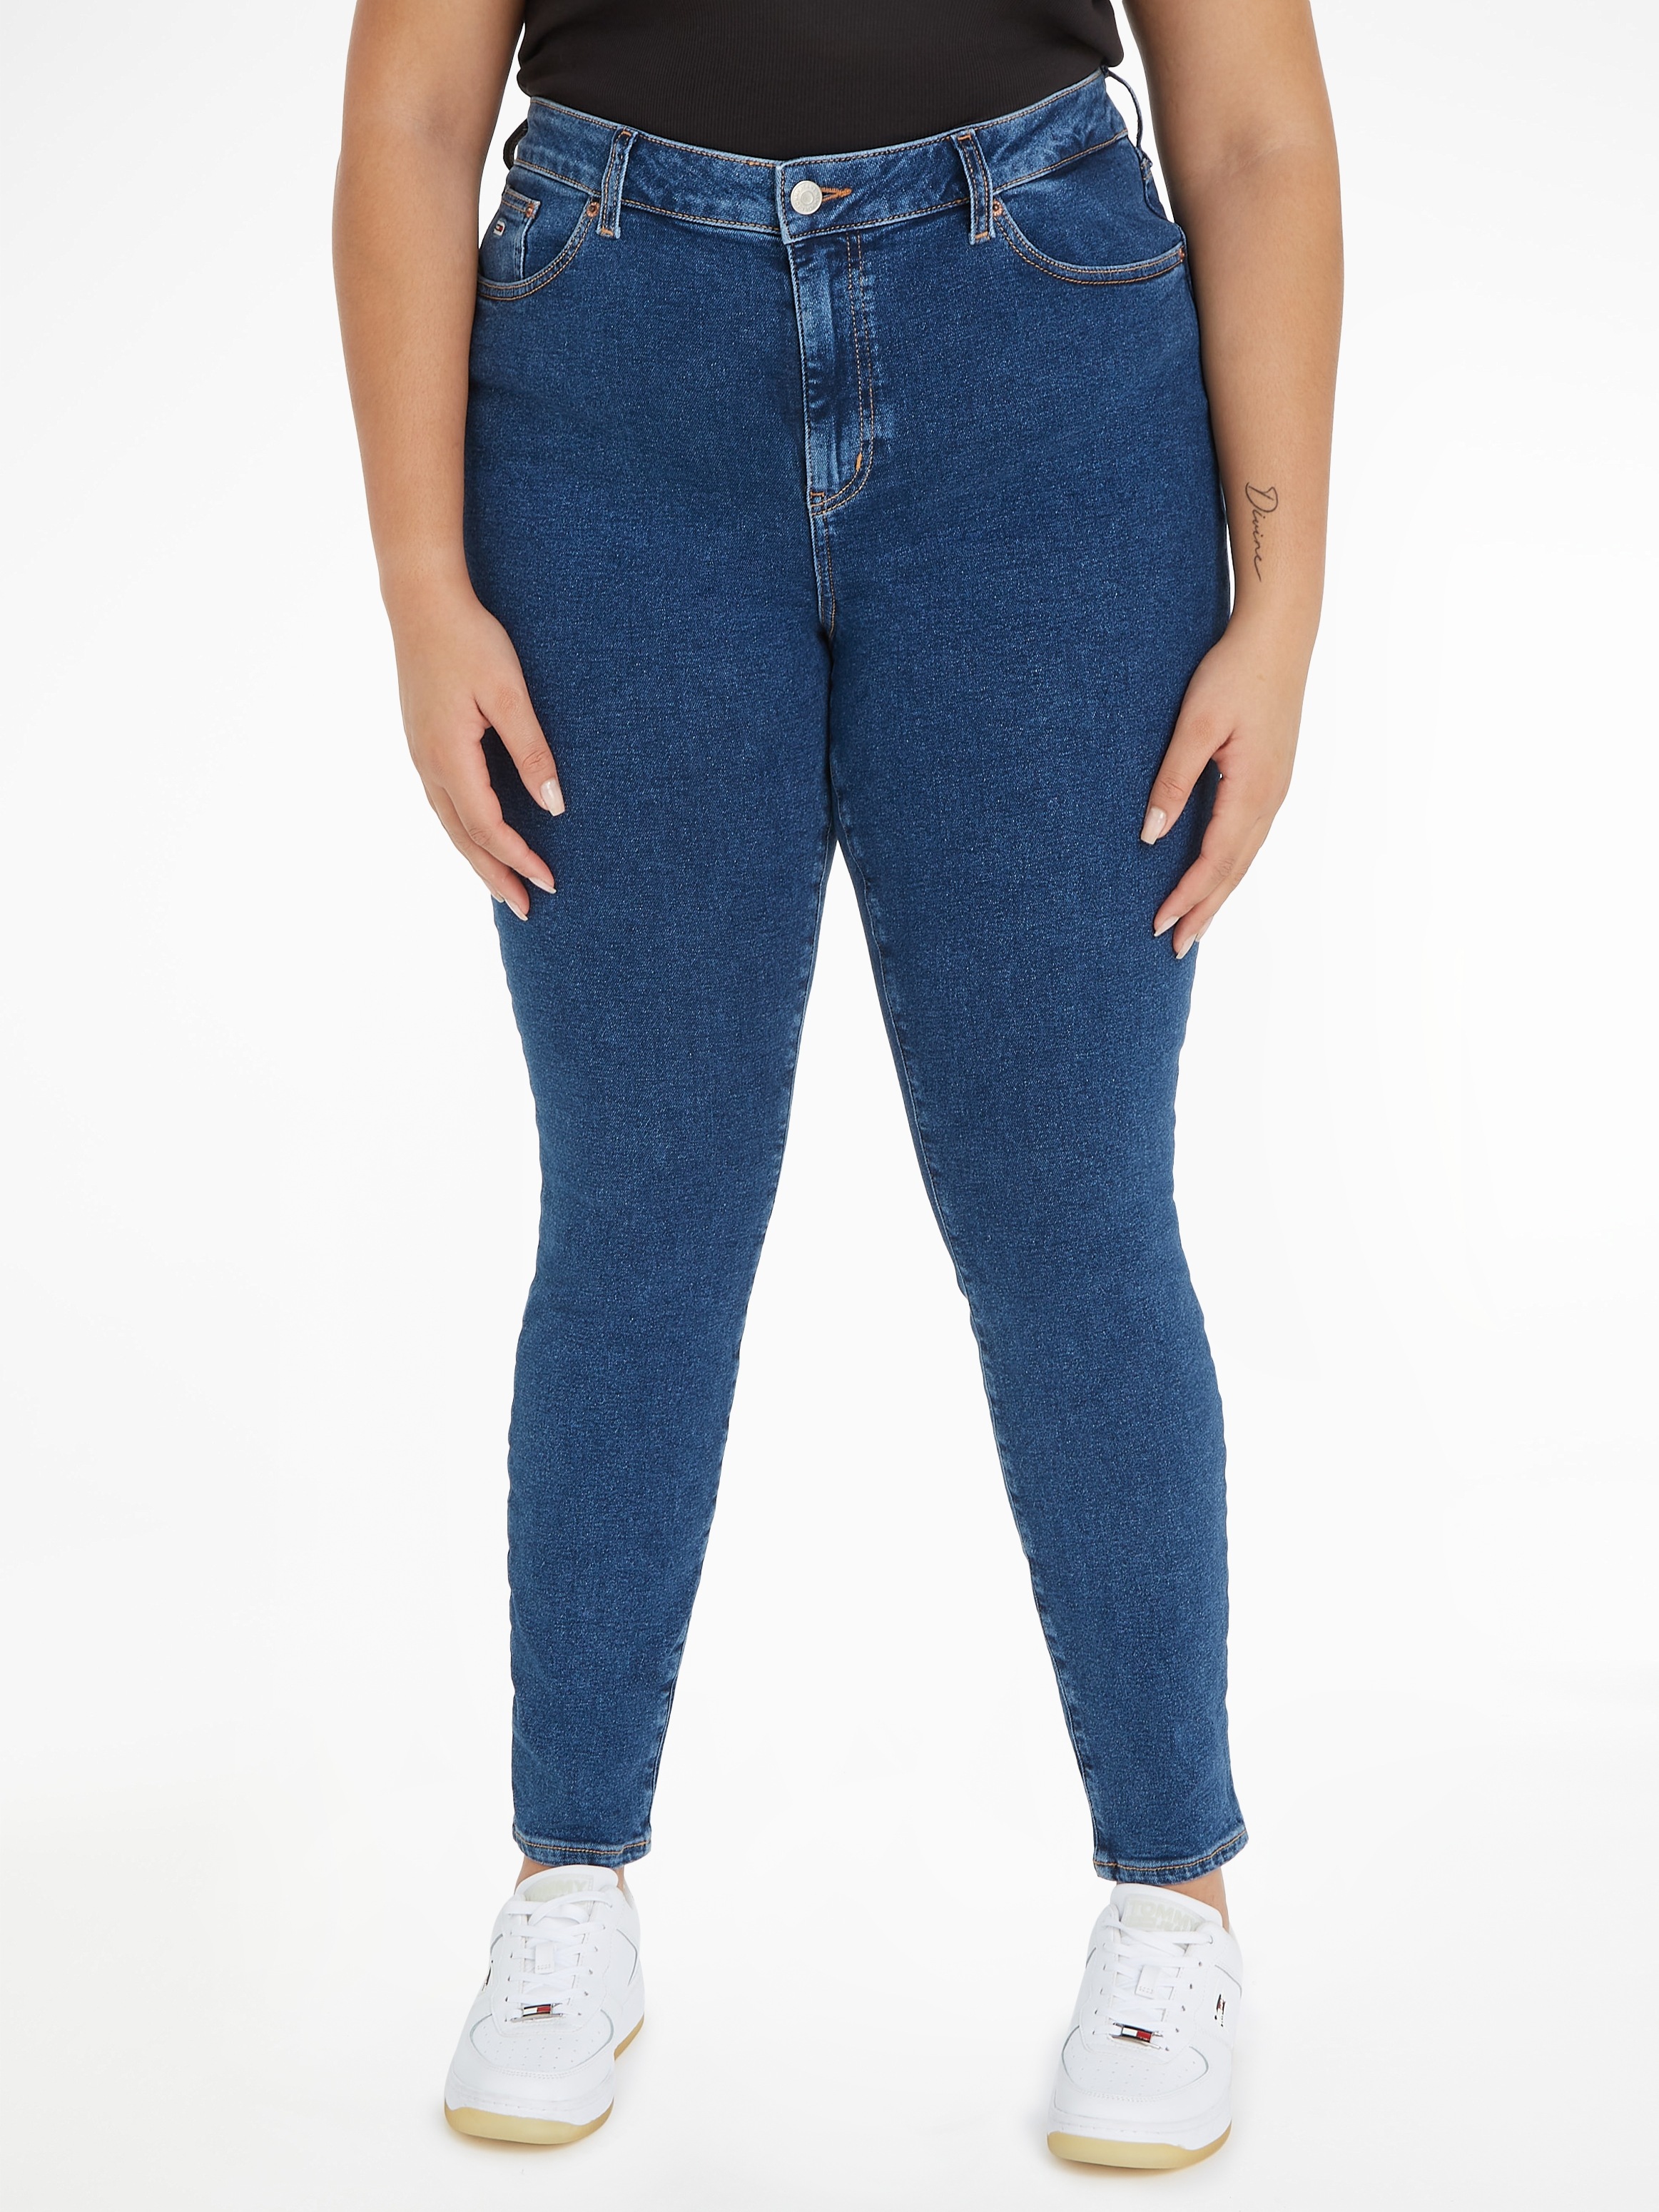 Weiten Tommy wird OTTOversand CURVE, Skinny-fit-Jeans, SIZE Jeans bei Curve in PLUS Jeans angeboten